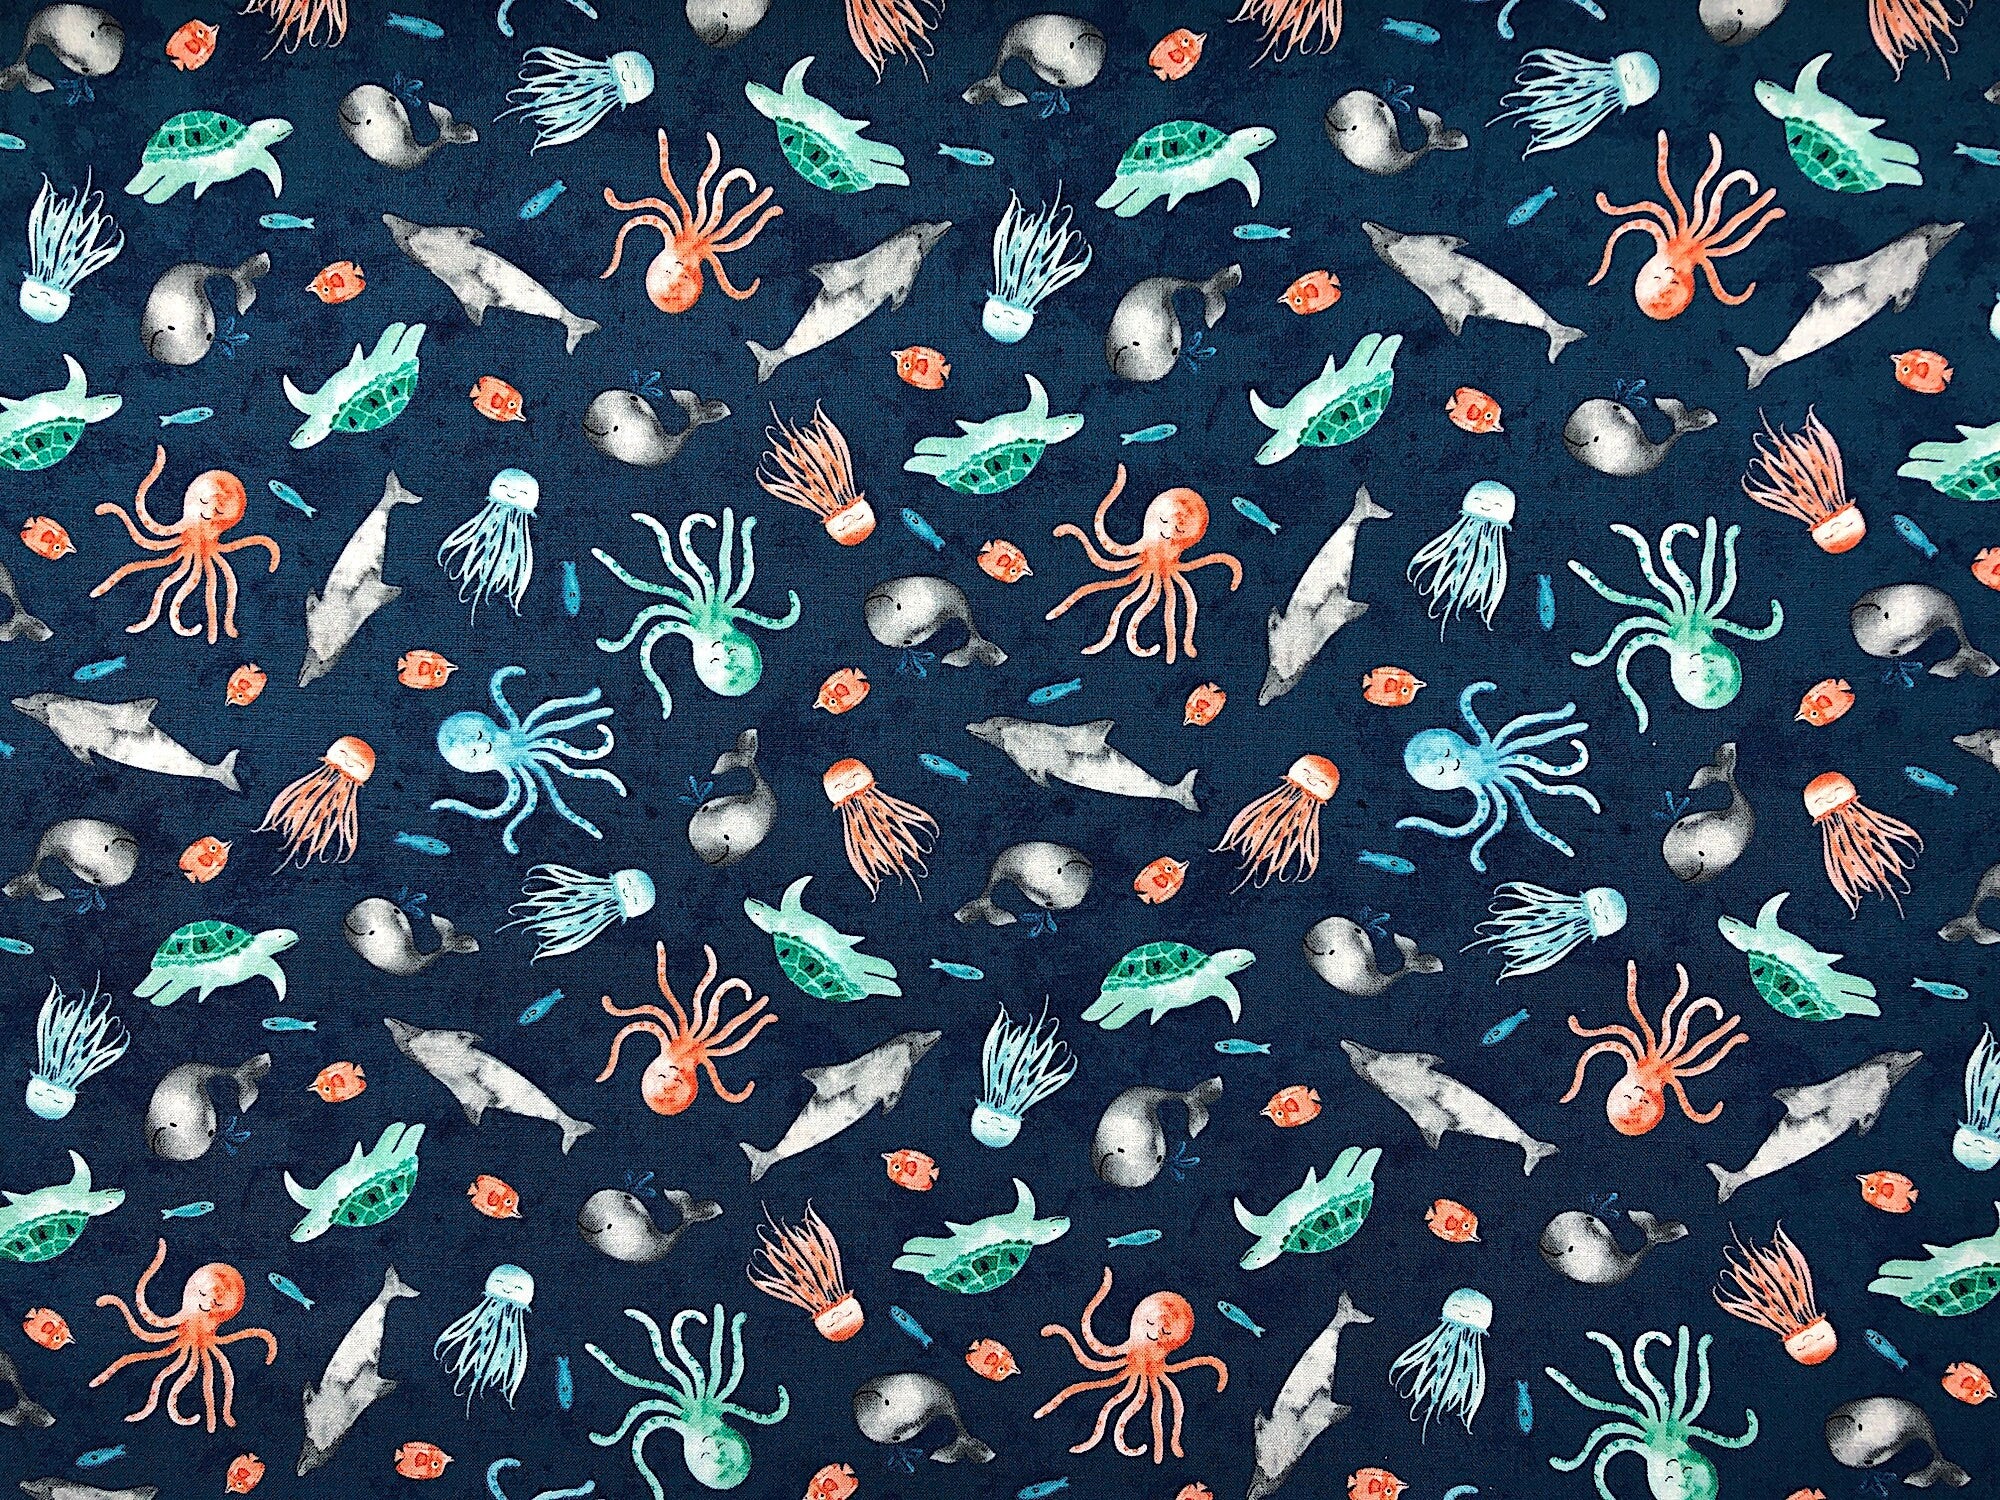 This fabric is called Whaley Loved and is covered with whales, octopus, turtles, dolphins and more.